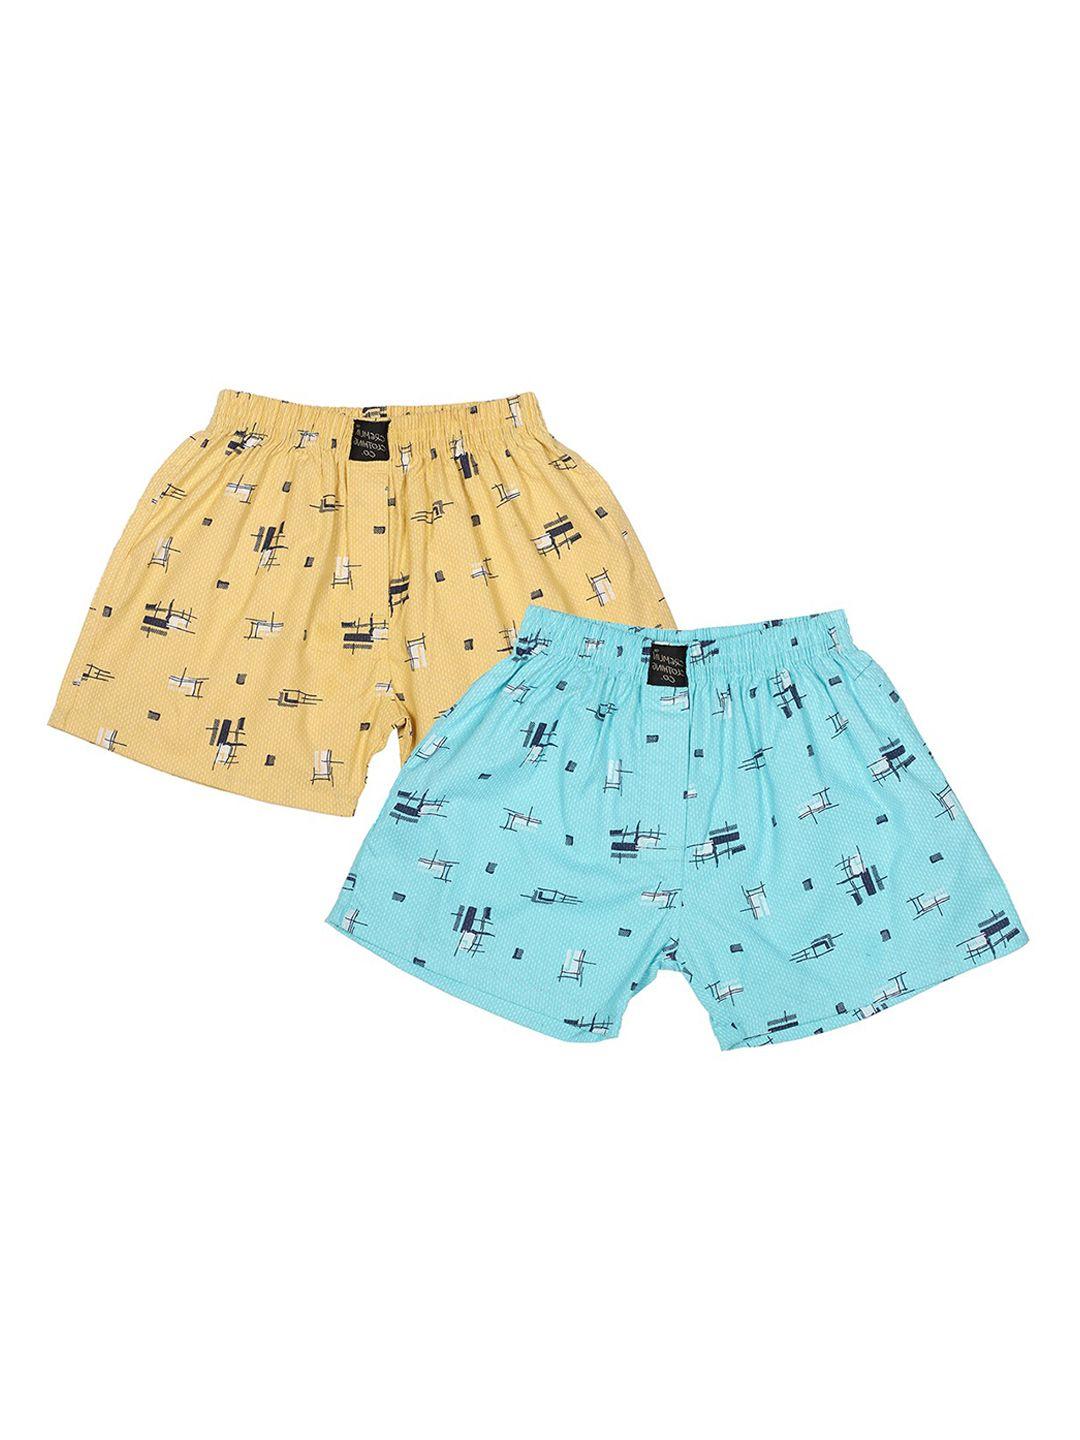 cremlin clothing pack of 2 boys blue and yellow printed cotton boxers